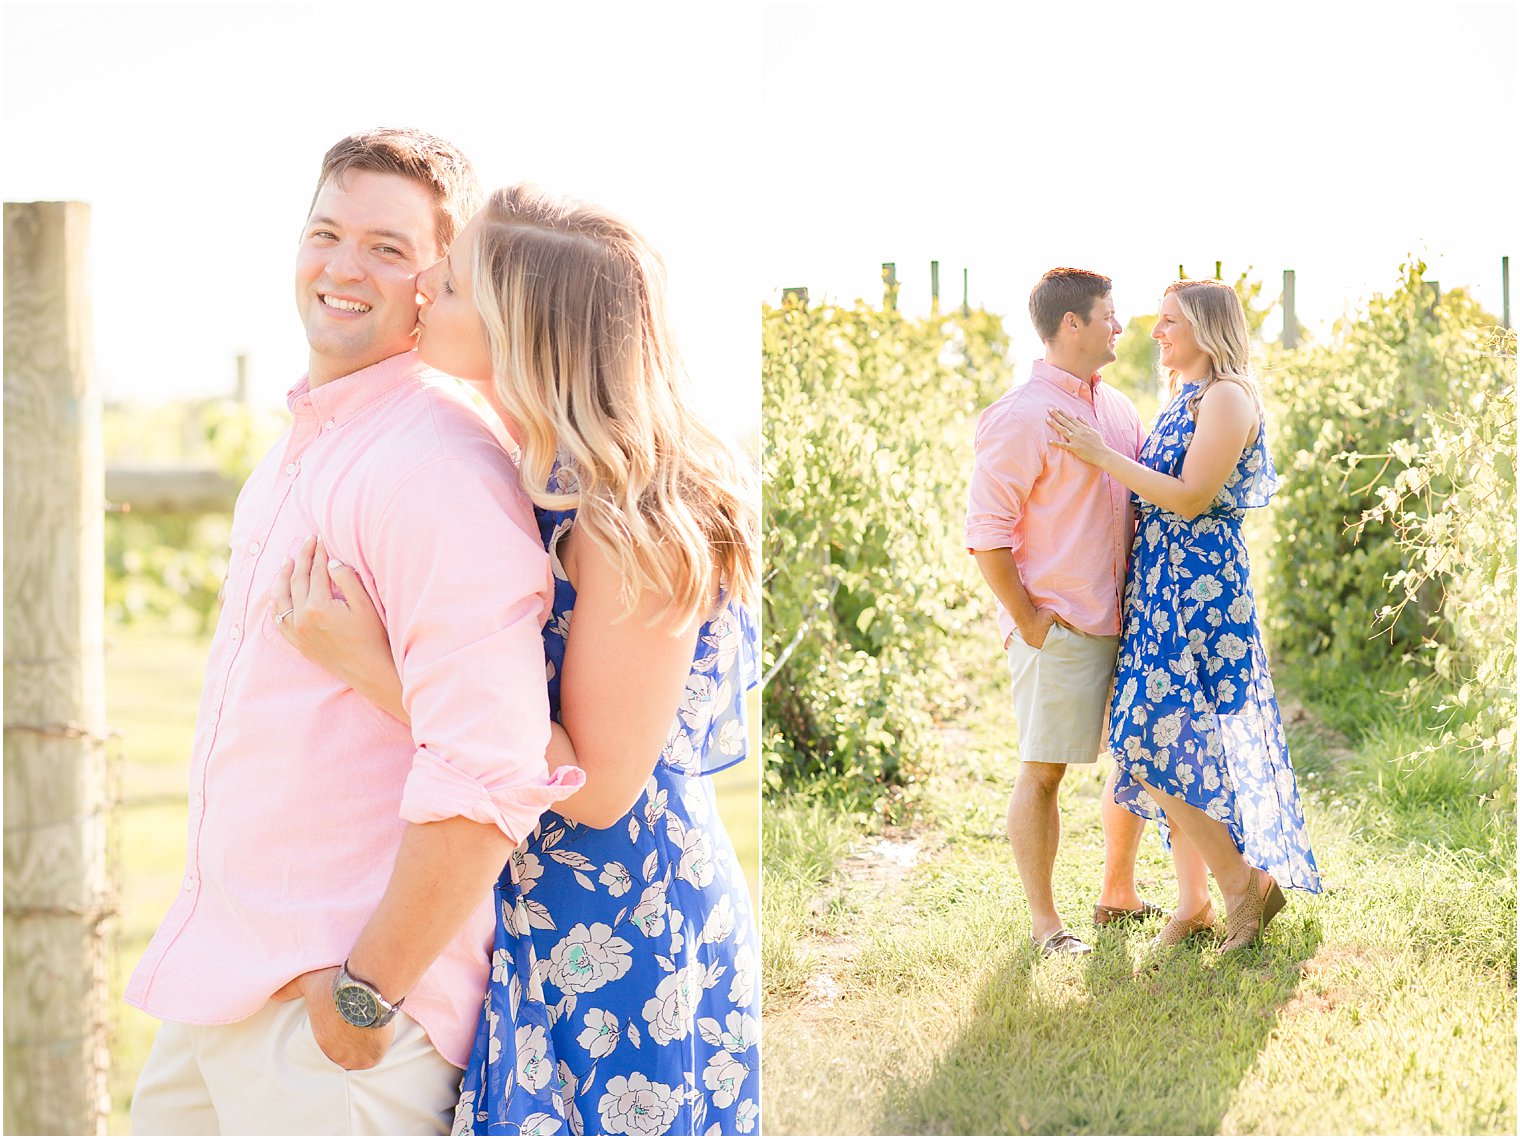 Vineyard engagement session at Laurita Winery